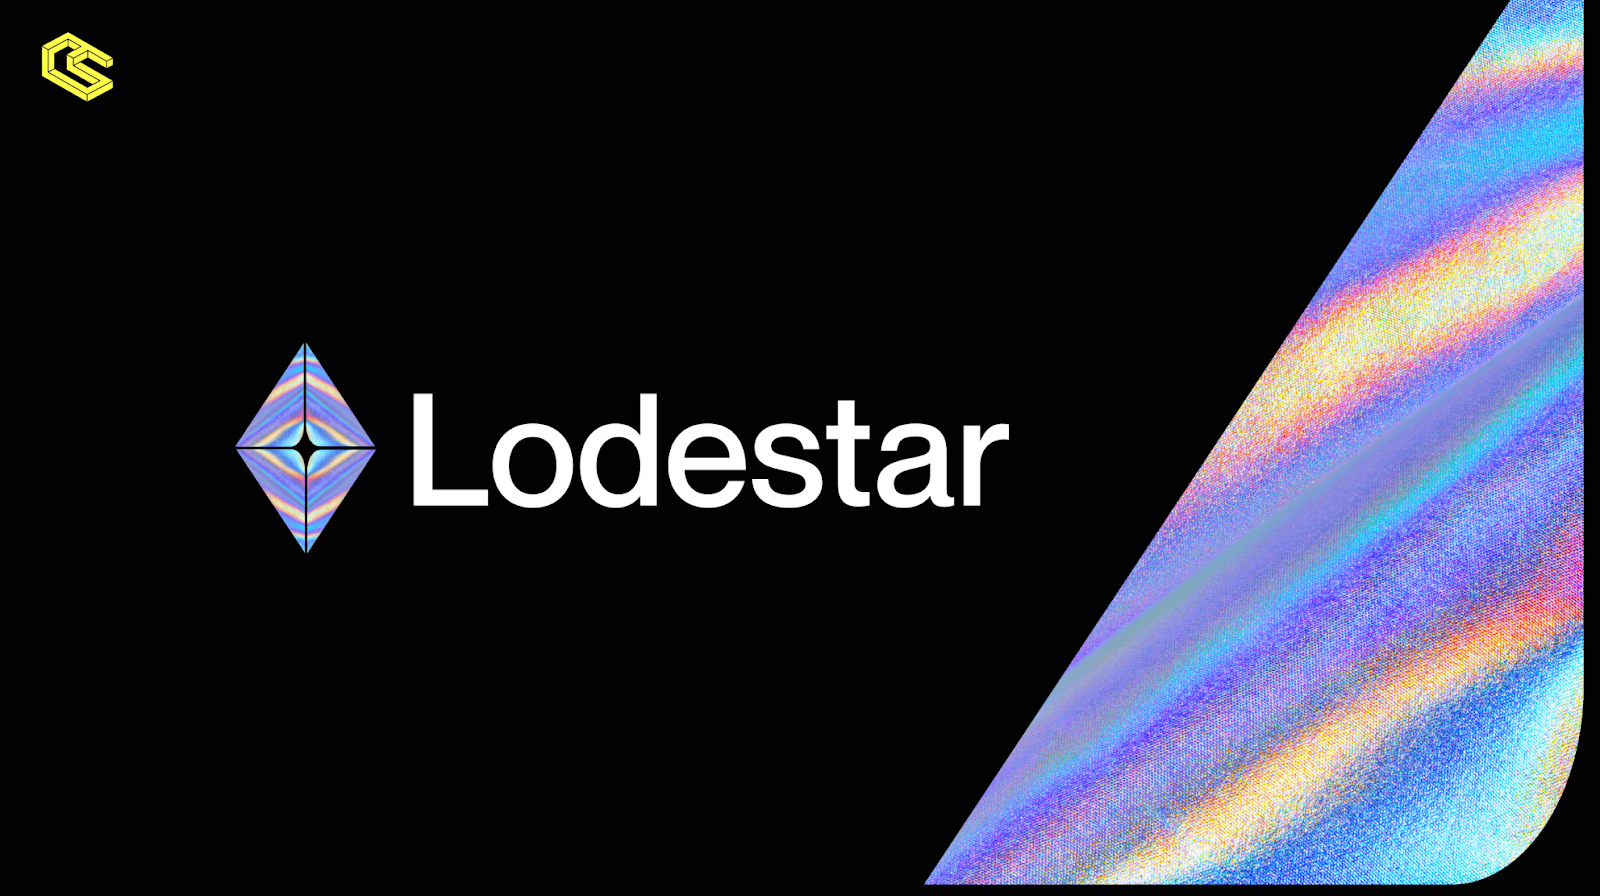 A Lodestar for Ethereum Consensus #1